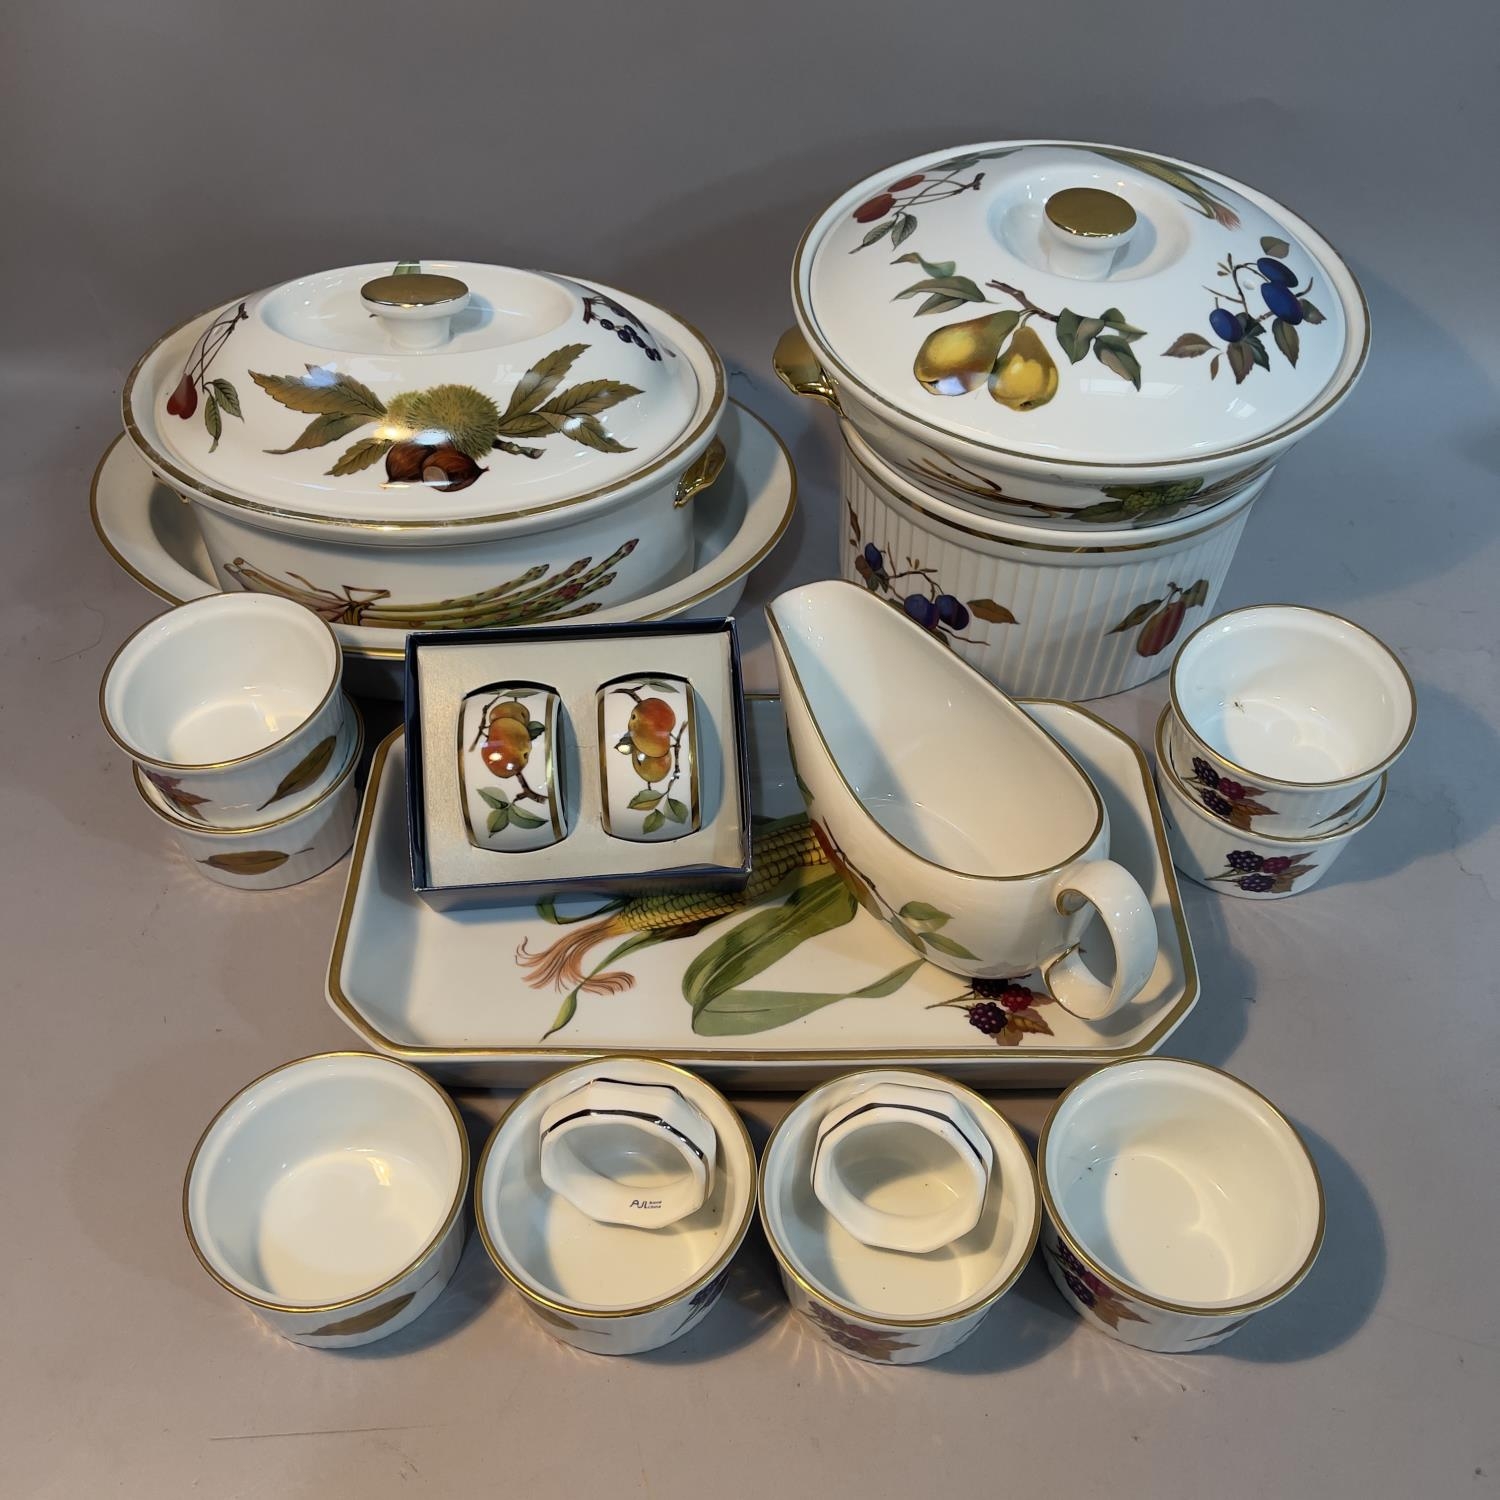 A quantity of Royal Worcester Evesham oven to table ware including oval tureens and covers, - Image 2 of 6